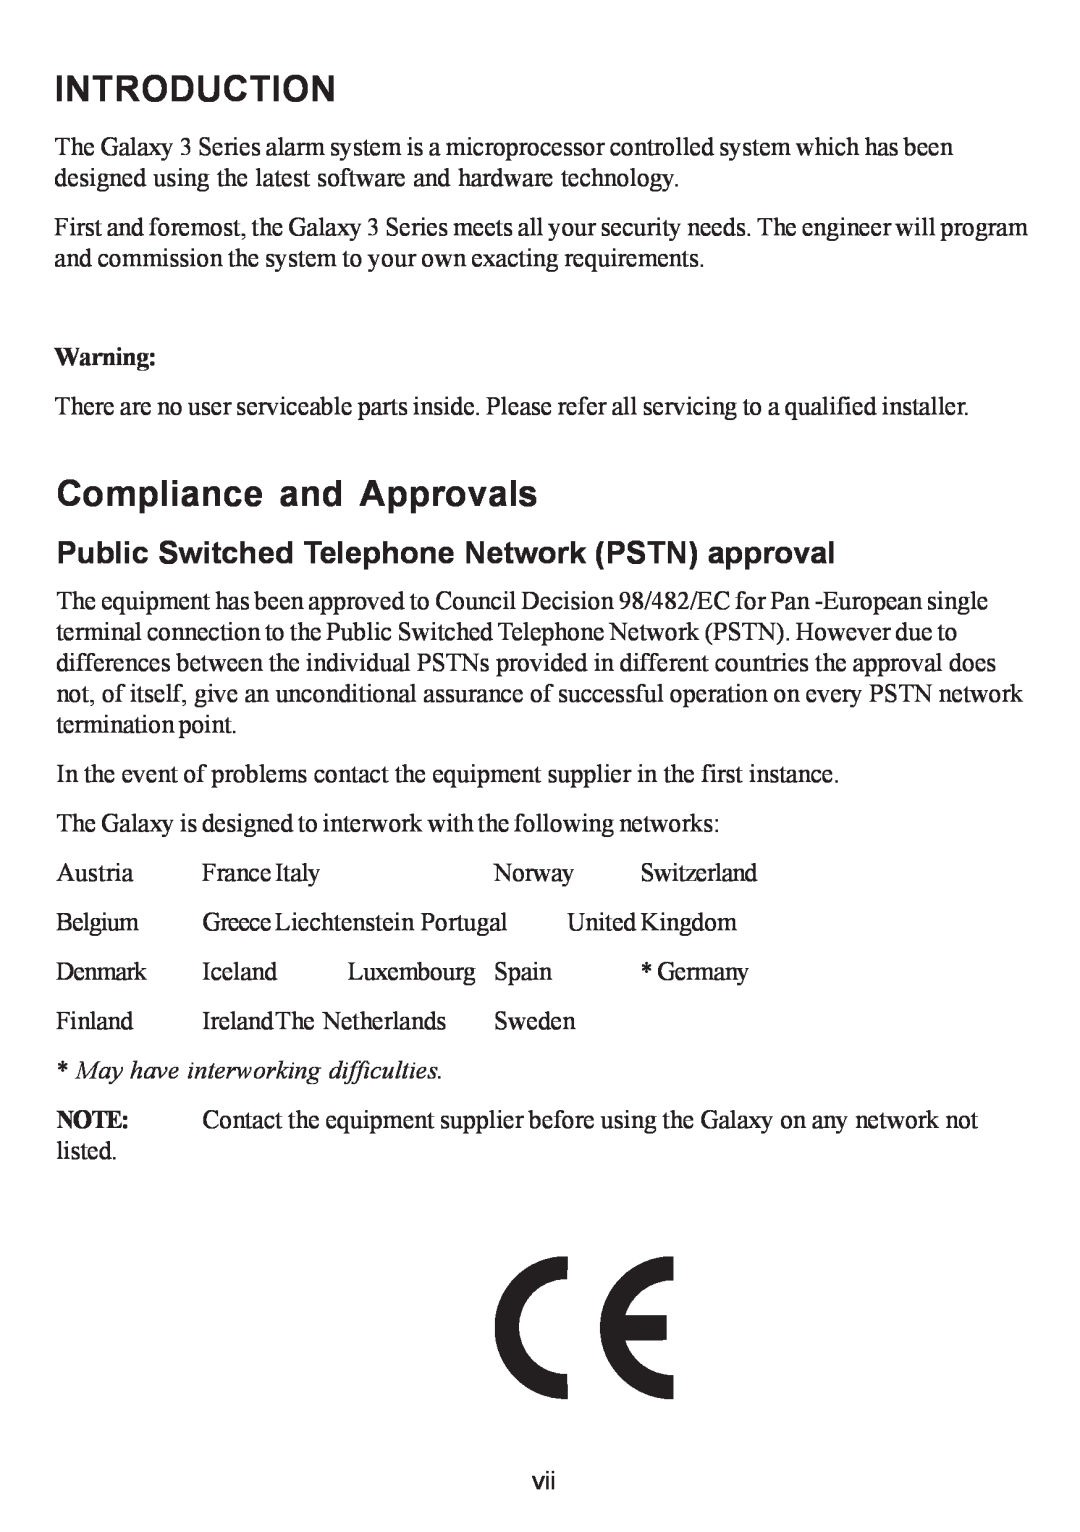 Honeywell 3-48C, 3-520C, 3-144C Introduction, Compliance and Approvals, Public Switched Telephone Network PSTN approval 